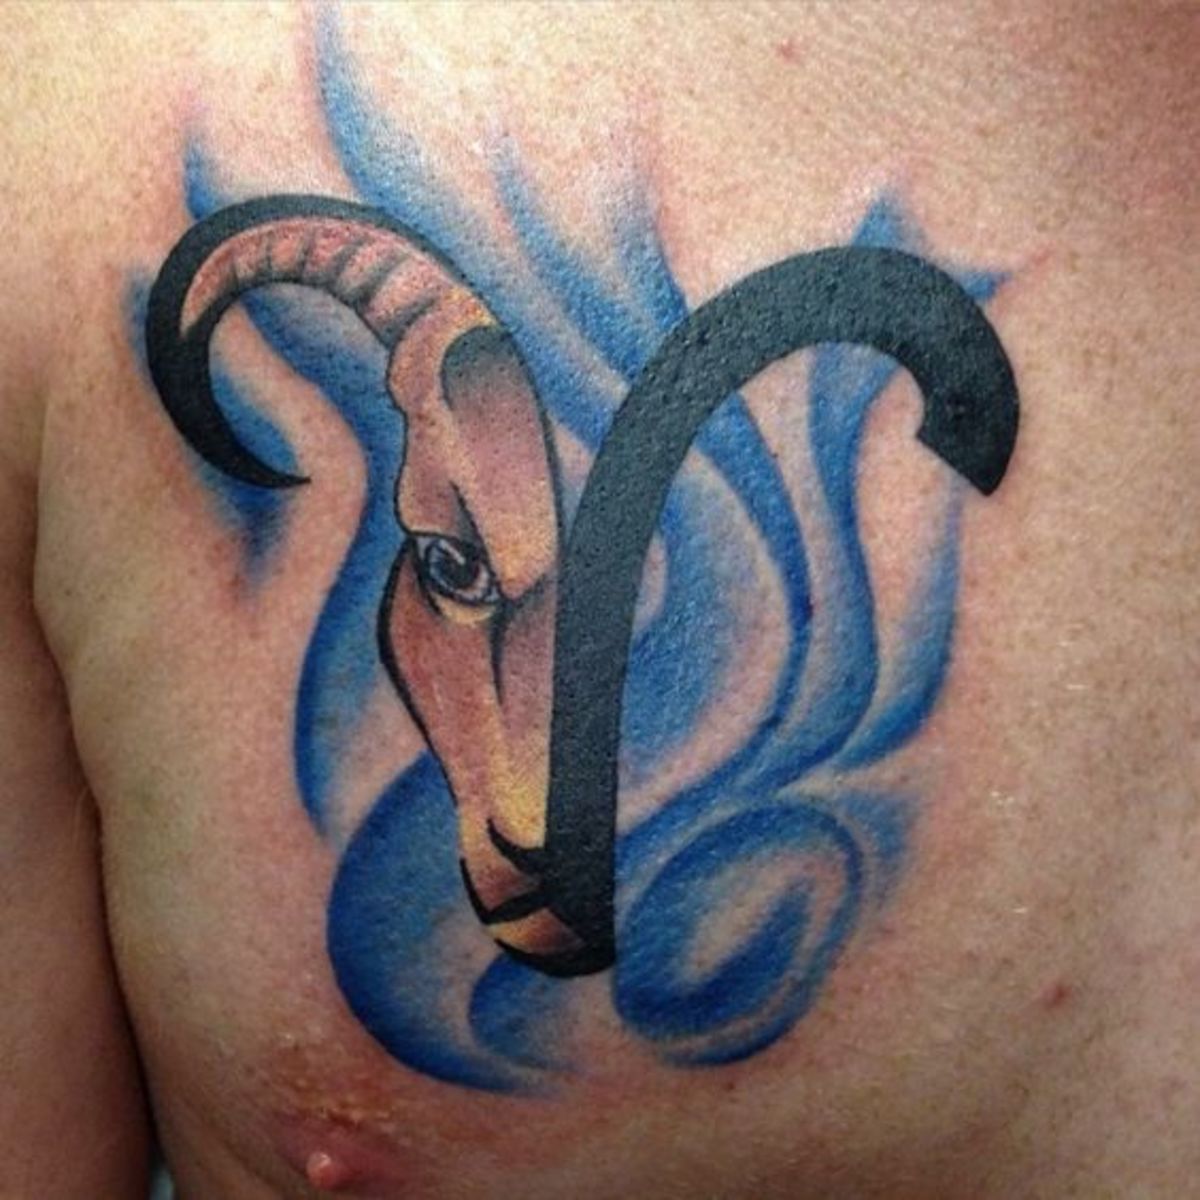 Aries Tattoo Ideas for Men and Women: Design Inspirations and Meanings ...